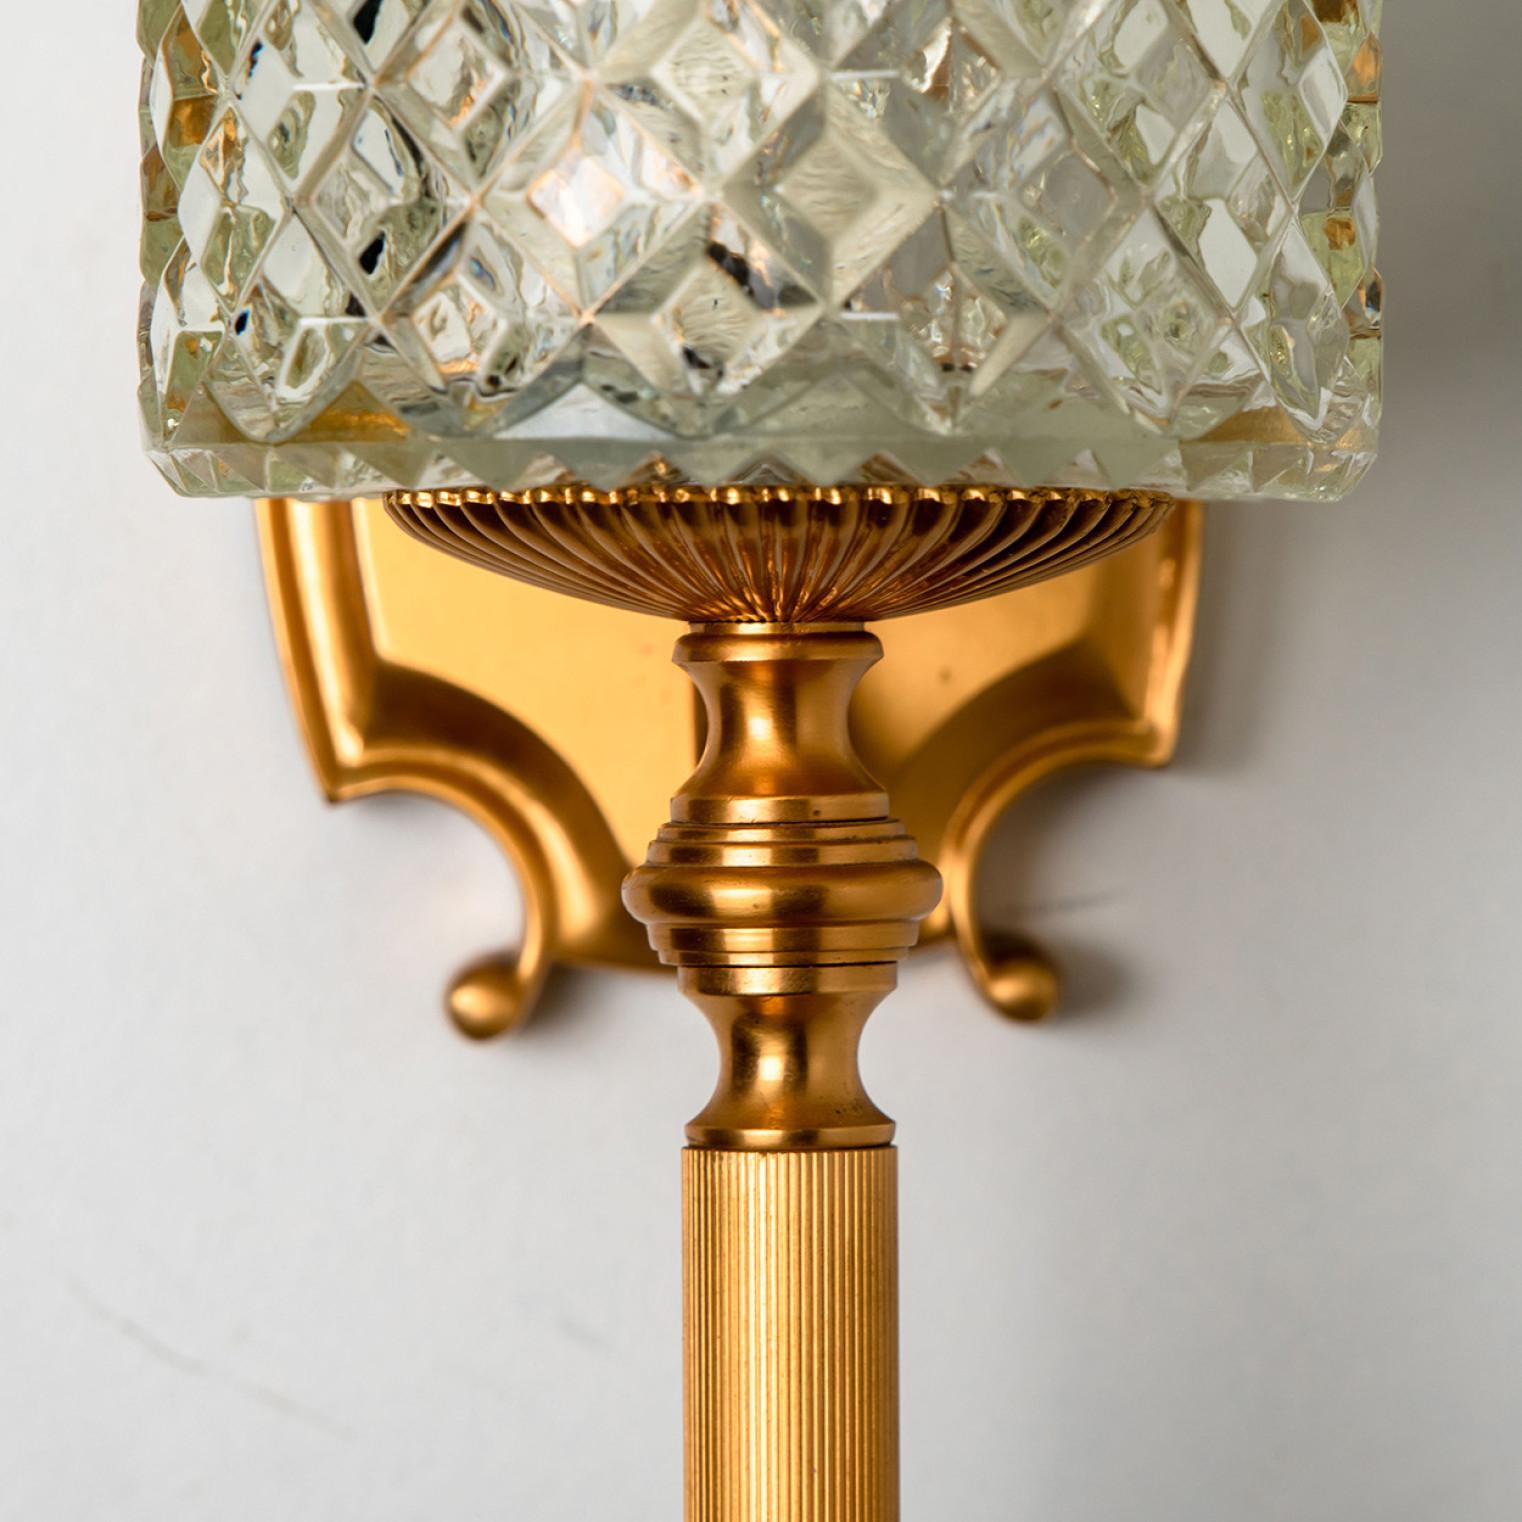 Textured Glass and Brass Wall Lights, Germany, 1960s For Sale 5